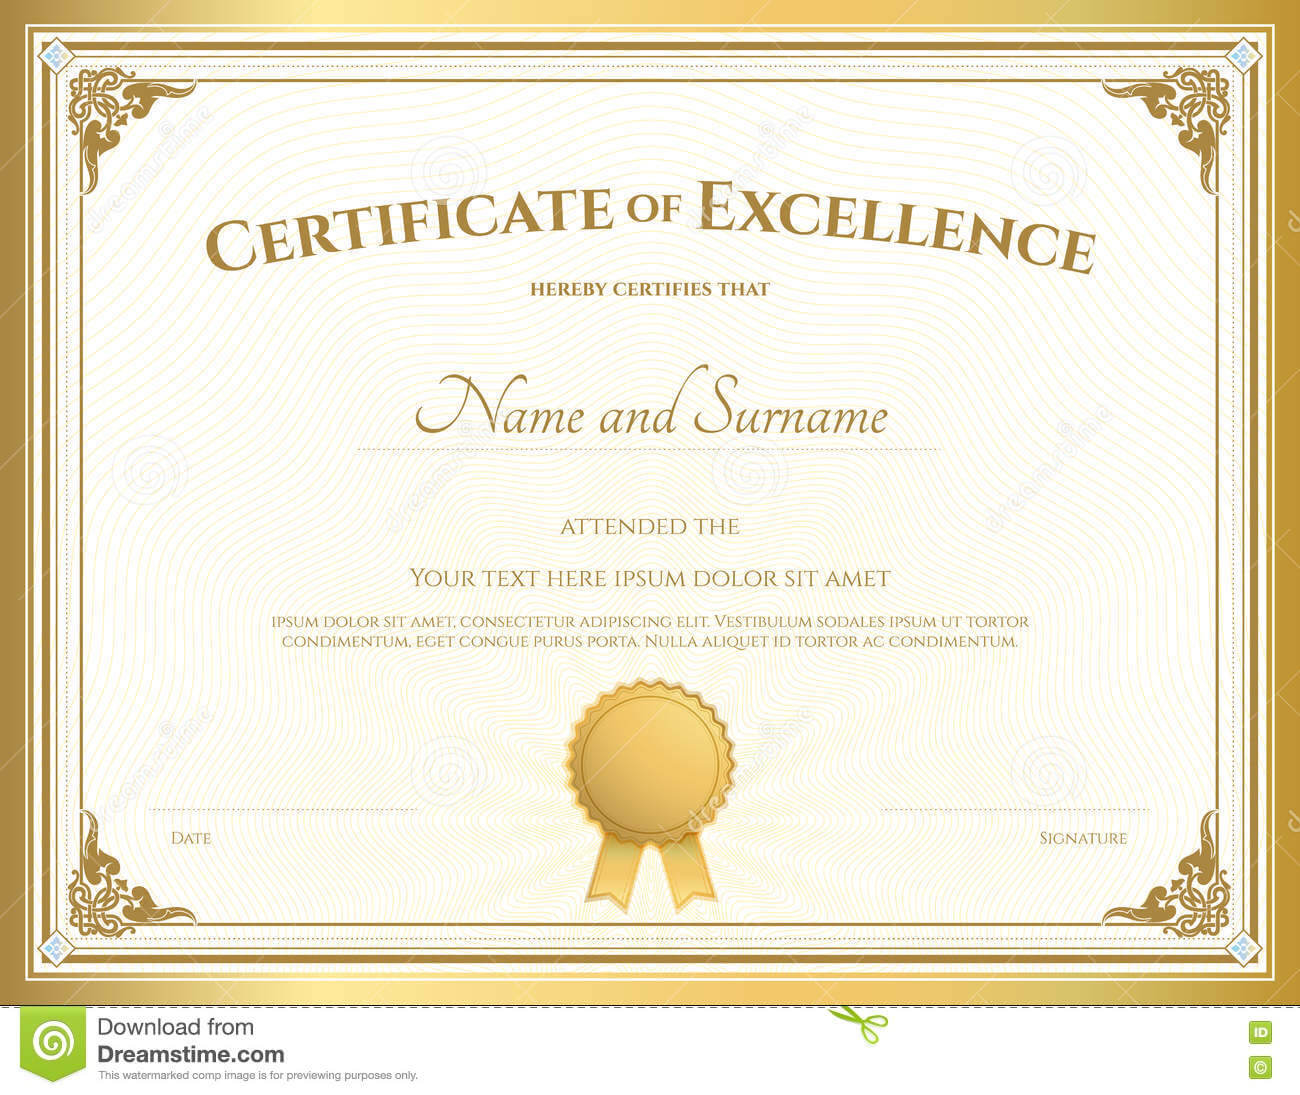 Certificate Of Excellence Template With Gold Border Stock Pertaining To Certificate Of Excellence Template Free Download